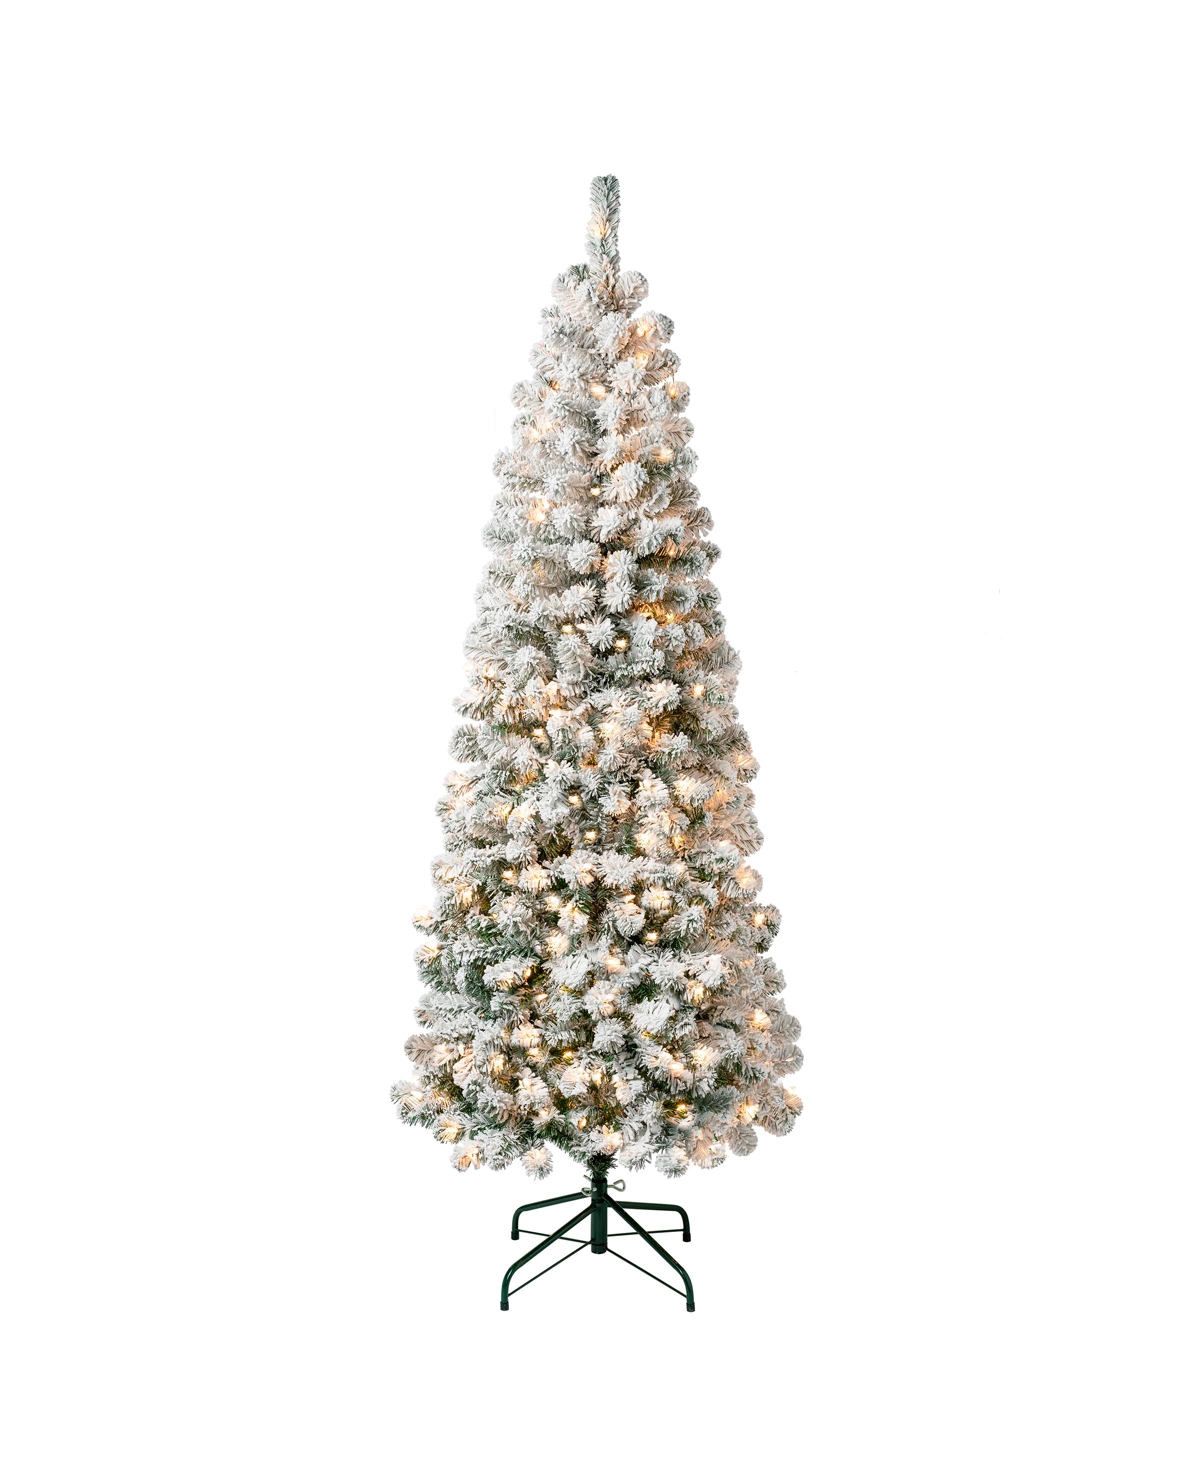 National Tree Company First Traditions 6' Acacia Medium Flocked Tree With Clear Lights In Green